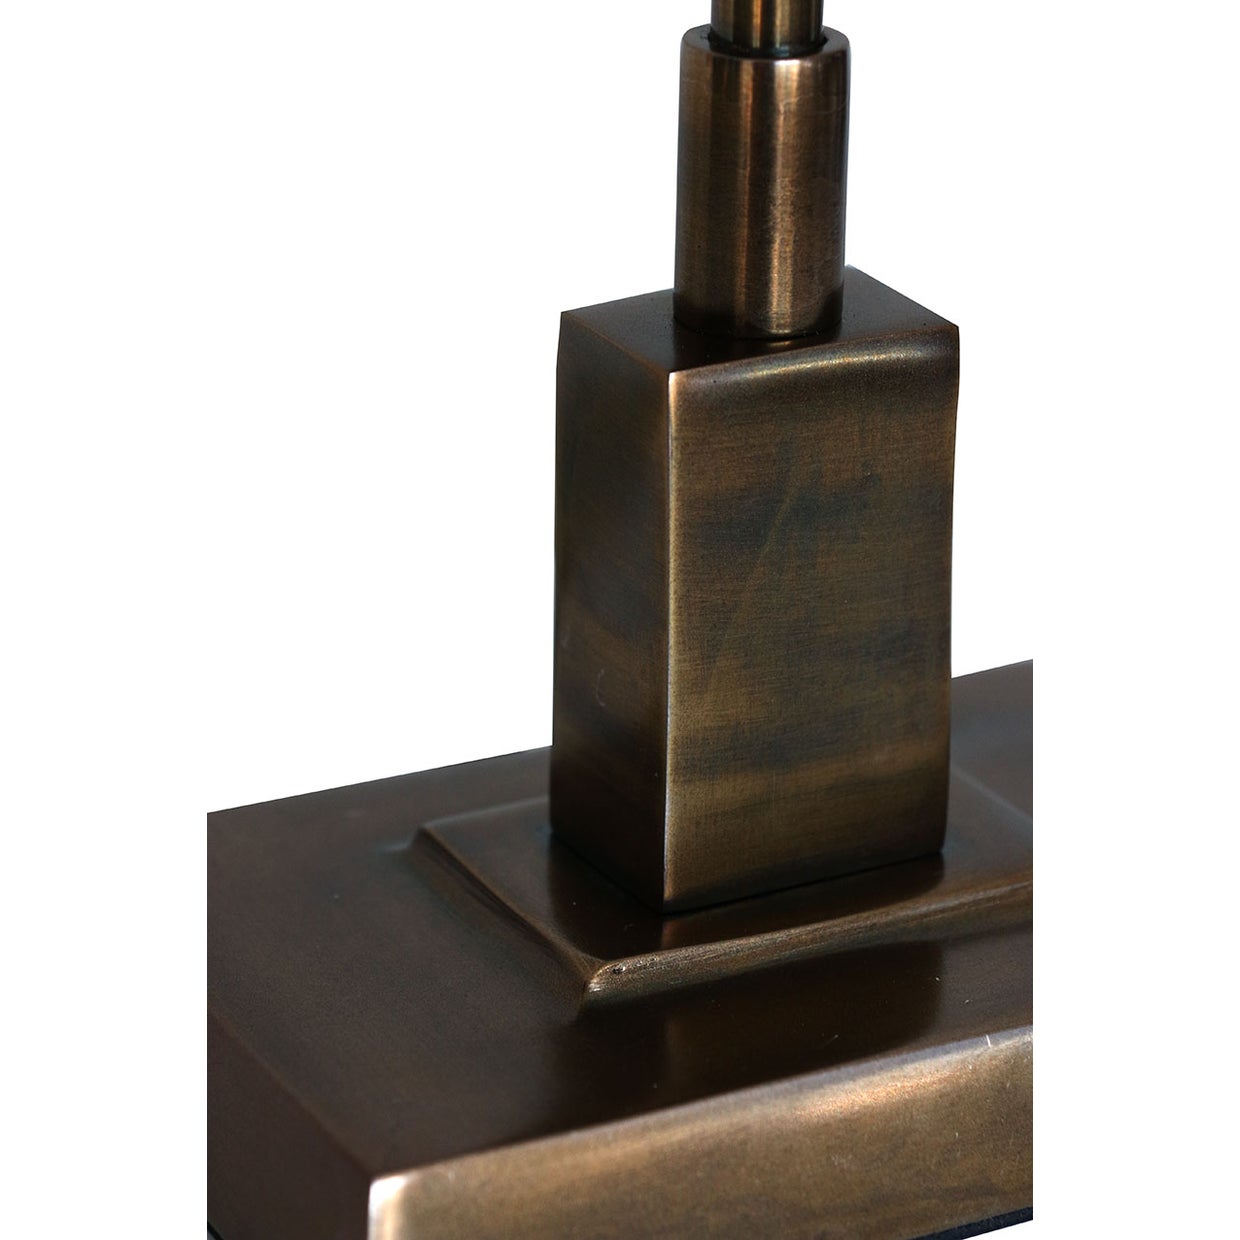 LUXOR RECTANGLE LAMP BASE IN ANTIQUE BRASS FINISH